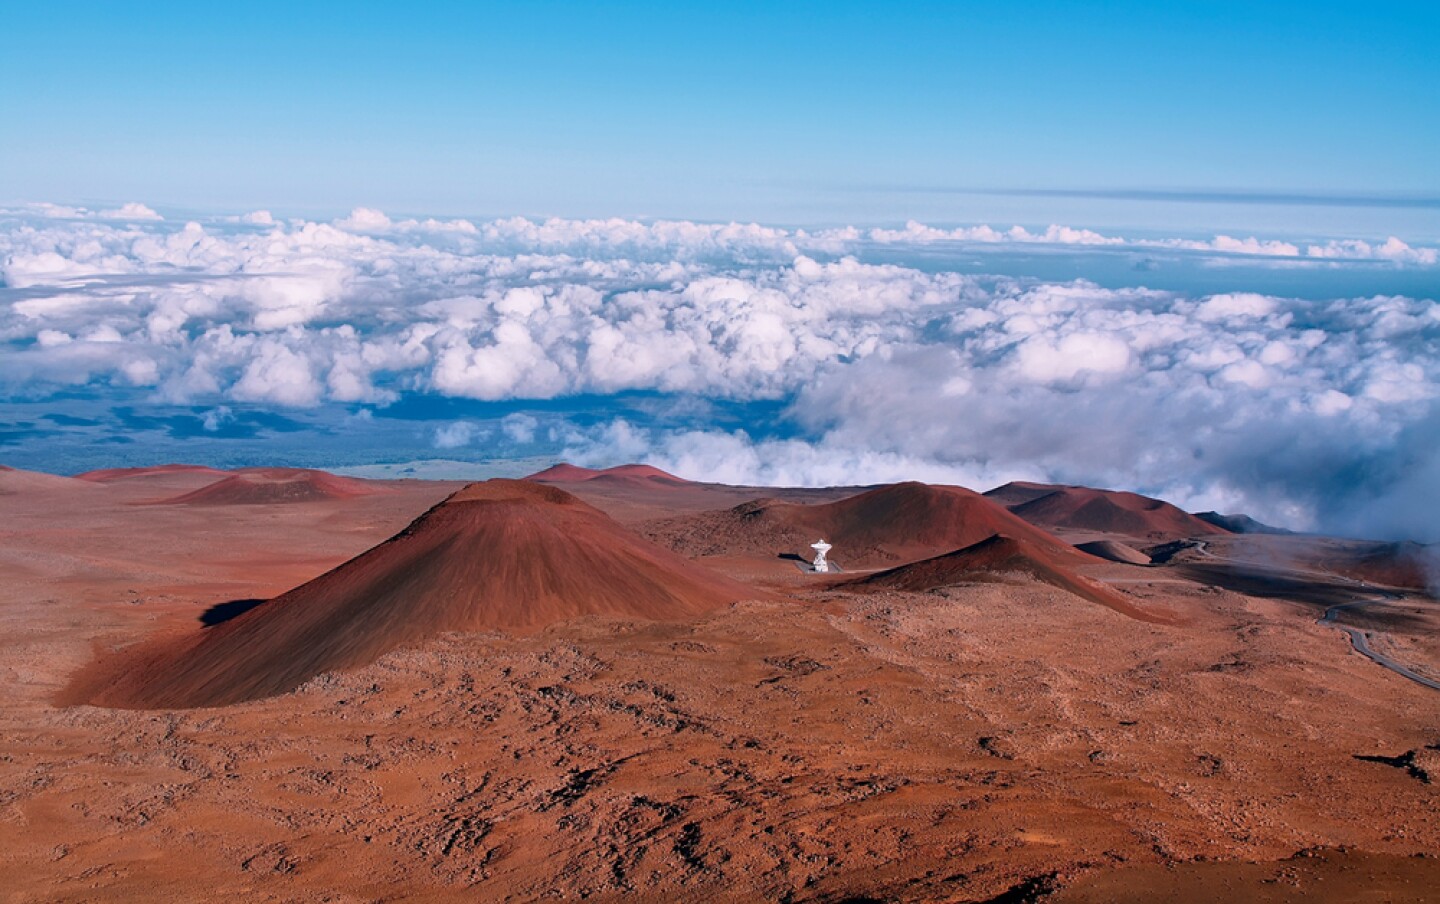 <h2>5. Mauna Kea, Hawai‘i</h2> <p> Located on the <a class="Link" href="https://www.afar.com/travel-guides/united-states/hawaii/the-island-of-hawaii/guide" rel="noopener">Big Island</a>, dormant volcano <span>Mauna Kea</span> offers both the highest peak in <a class="Link" href="https://www.afar.com/travel-guides/united-states/hawaii/guide" rel="noopener">Hawai‘i</a> as well as the best stargazing opportunities in the region. About halfway up Mauna Kea, which reaches nearly 14,000 feet above sea level, the <a class="Link" href="https://hilo.hawaii.edu/maunakea/visitor-information/station" rel="noopener">Onizuka Center for International Astronomy Visitor Information Station</a> offers a <a class="Link" href="https://hilo.hawaii.edu/maunakea/kuene/stargazing.php#events" rel="noopener">stargazing program</a> for visitors. From there, visitors can continue to the volcano’s summit with their own four-wheel-drive vehicle or as part of a <a class="Link" href="https://maunakea.com/" rel="noopener">guided excursion</a>. (Still, it’s advised that travelers pause at the midway point to acclimatize to the dramatic change in elevation.)</p>